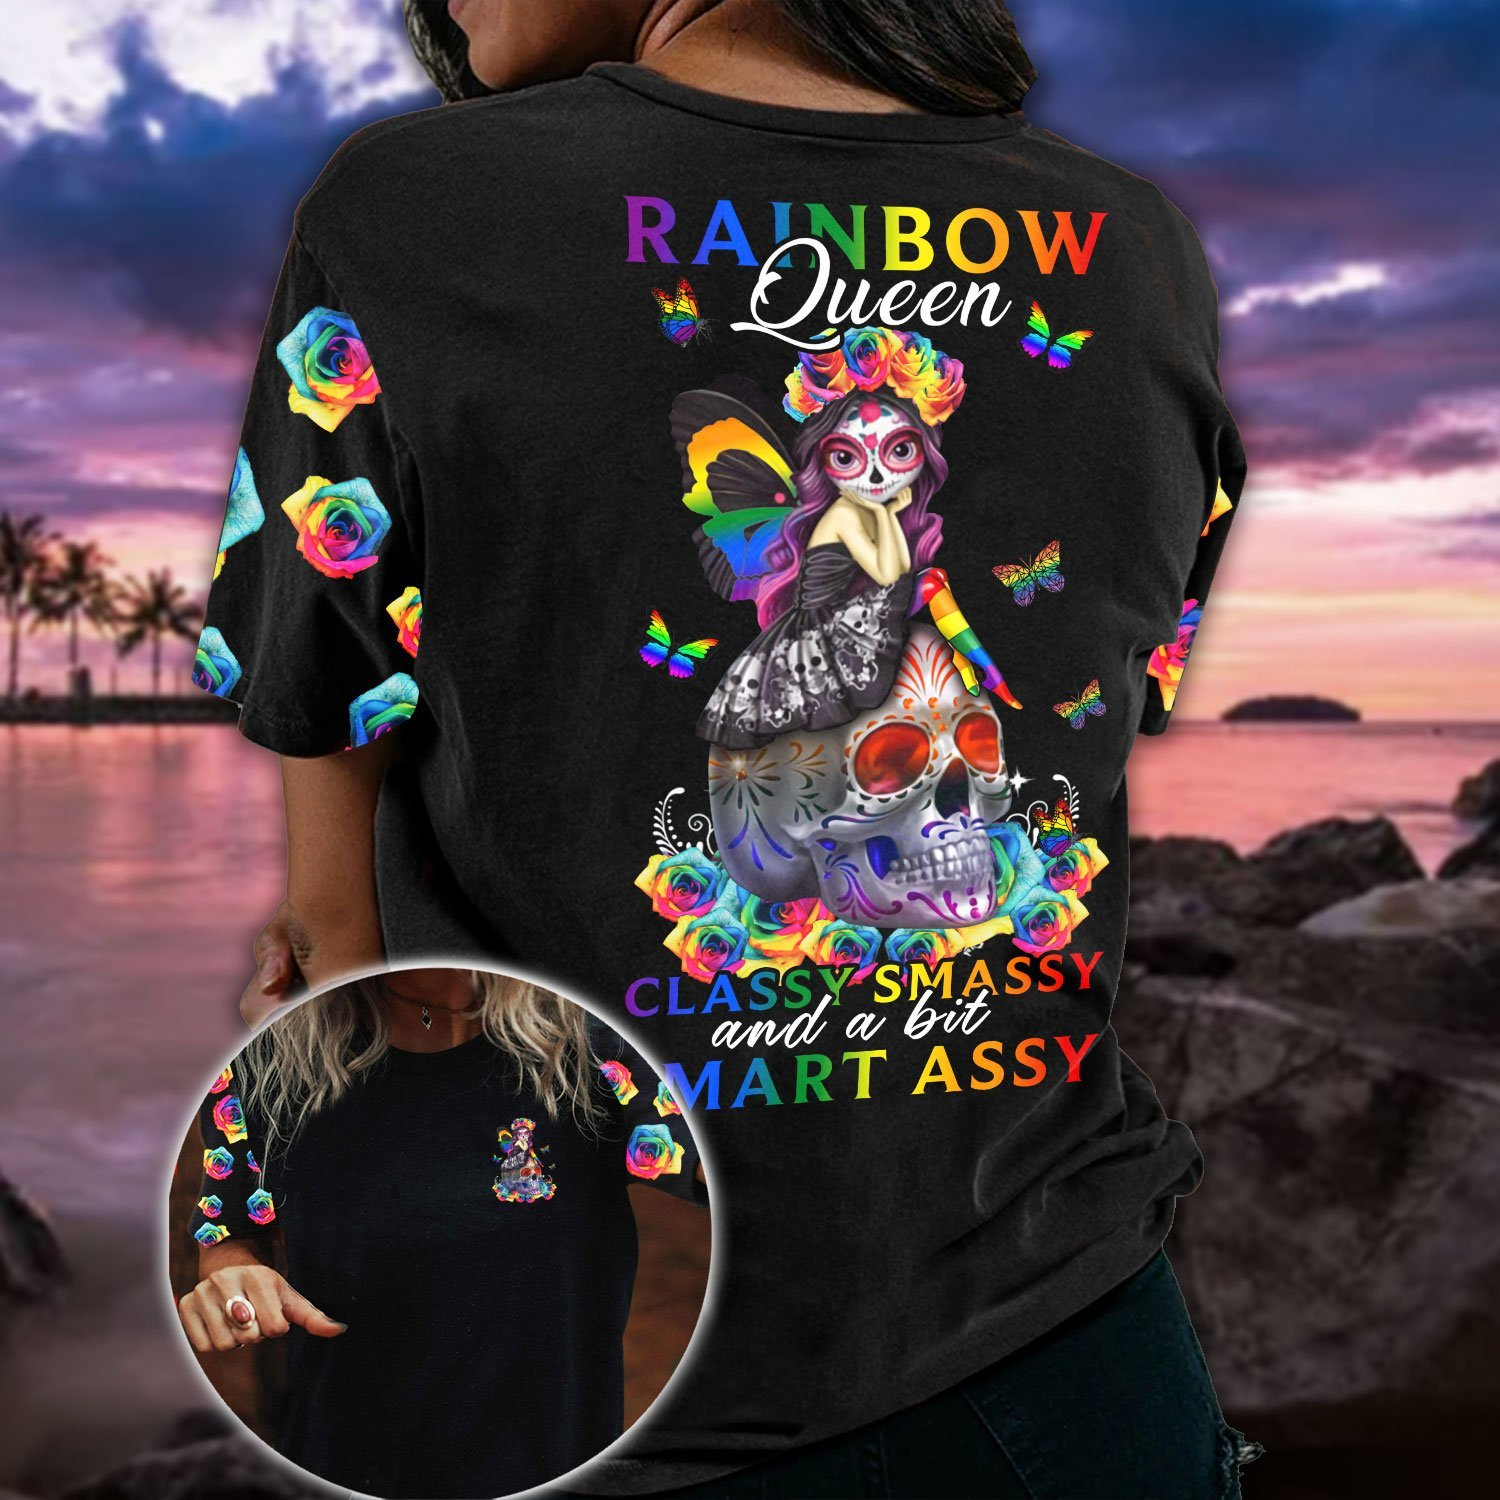 T Shirt Gift For Lesbian/ LGBT Rainbow Queen Classy Massy And A Bit Smart Assy 3D Shirts For LGBT Pride Month